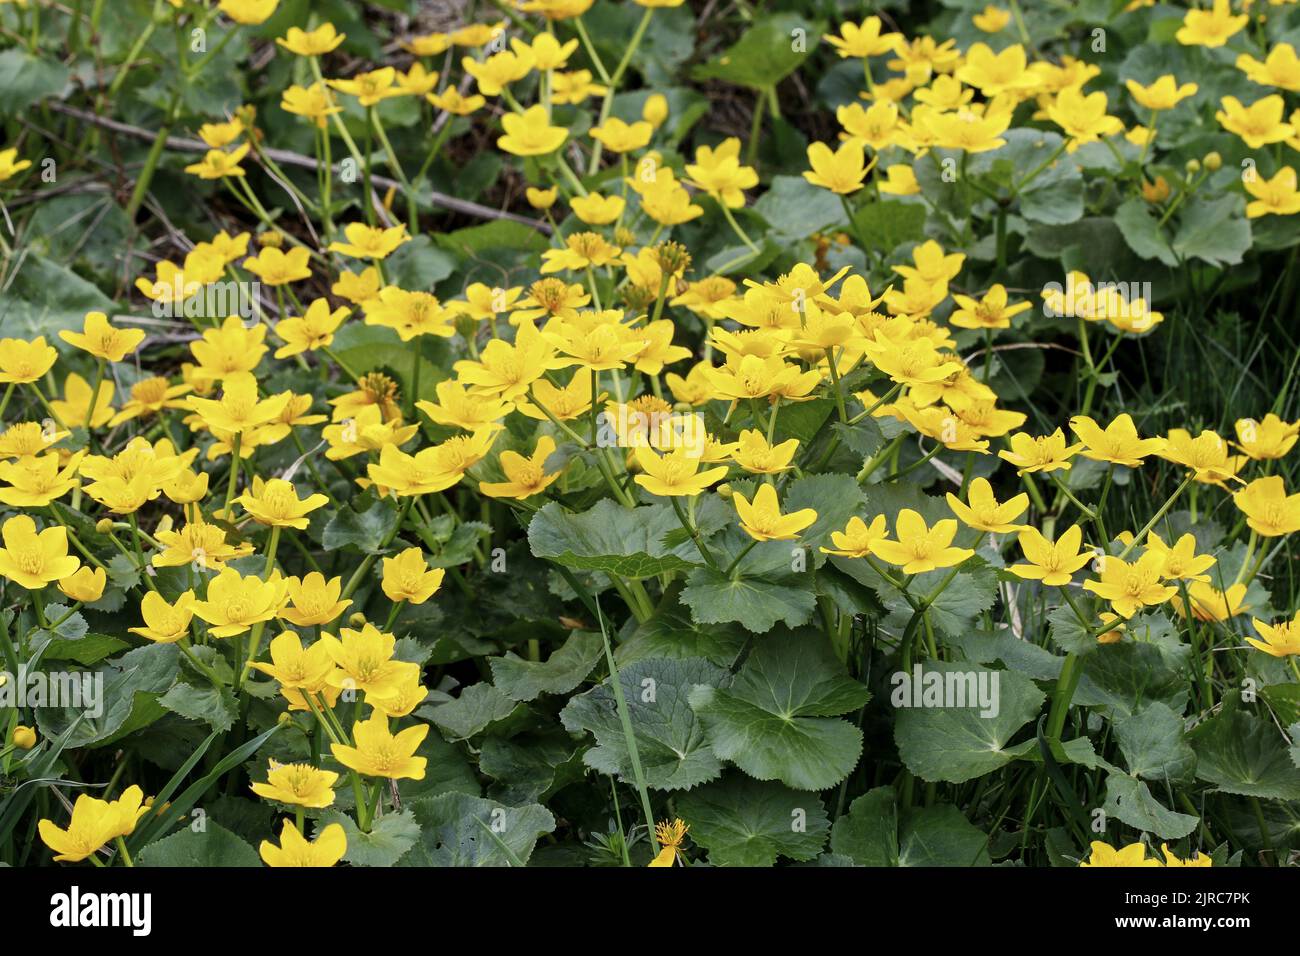 Caltha palustris, known as marsh-marigold and kingcup. Summer flowers Stock Photo